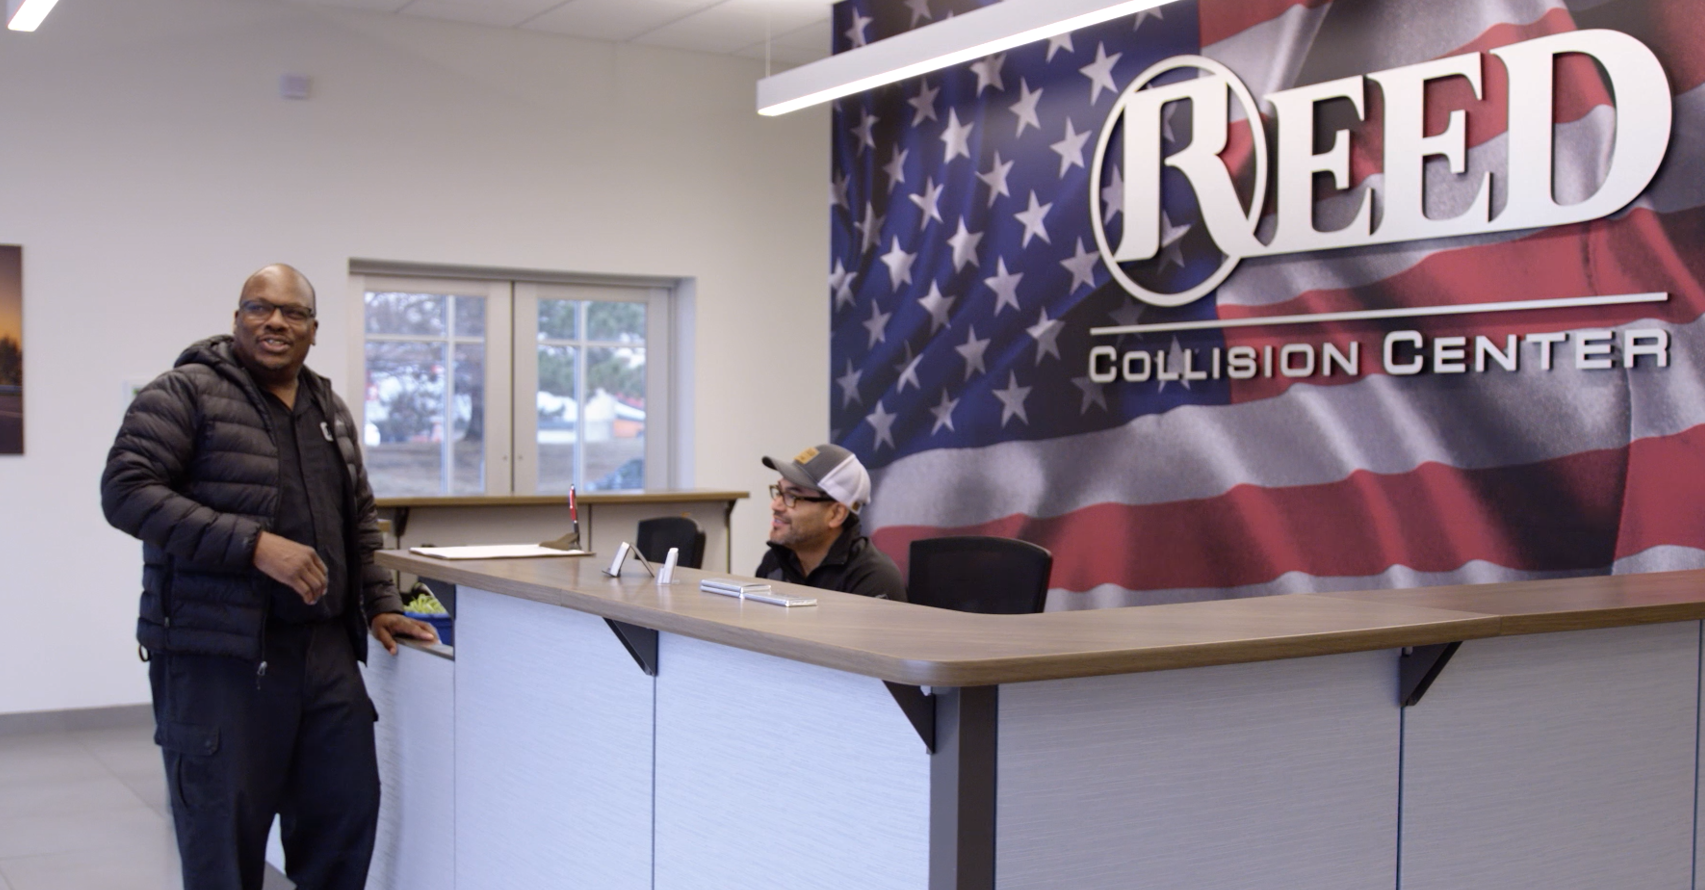 Reed Collision Center